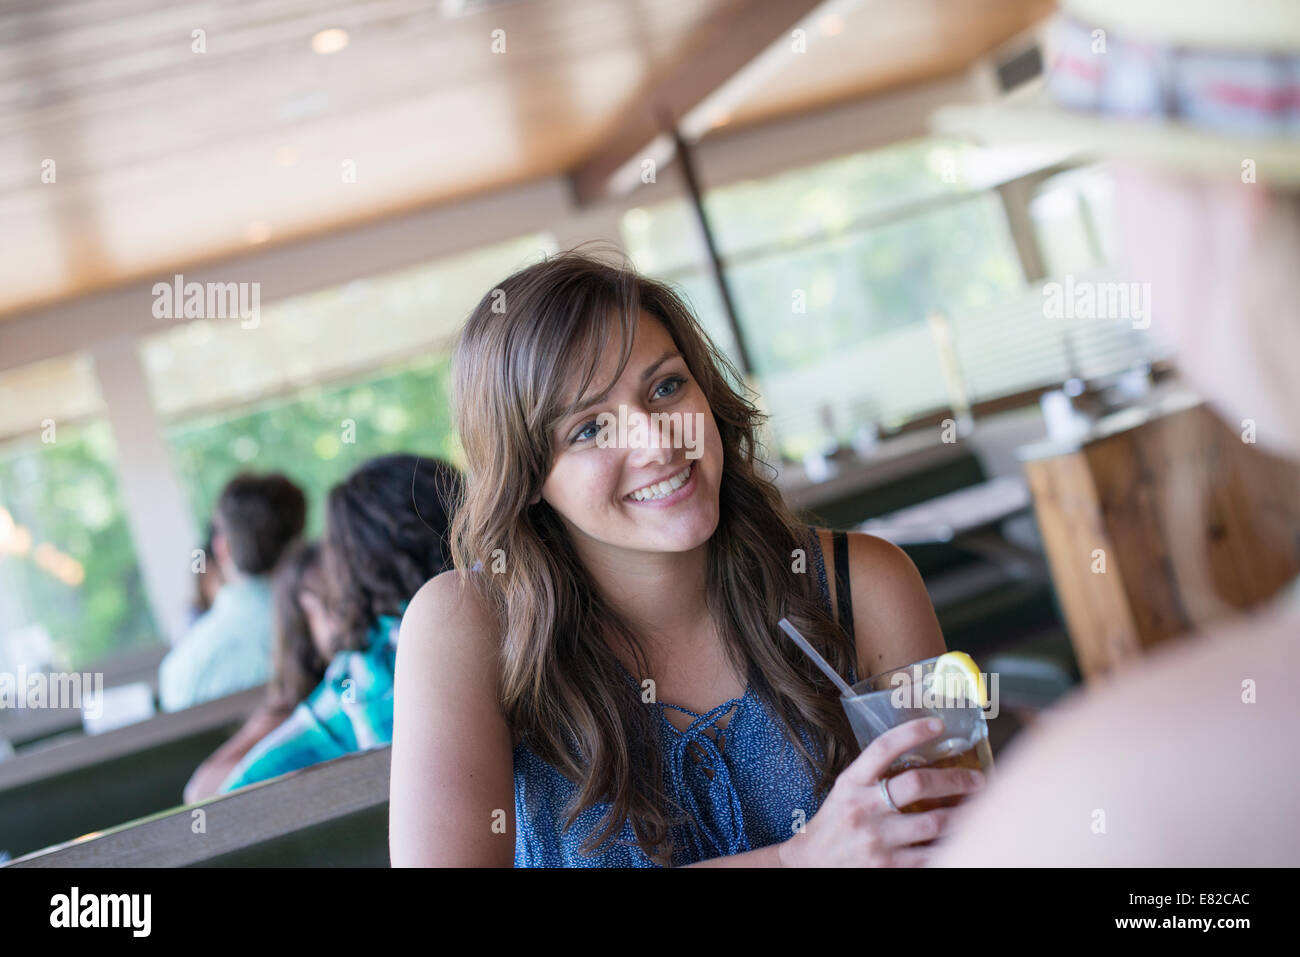 A young woman sitting at a table in a diner with a cool drink. Stock Photo